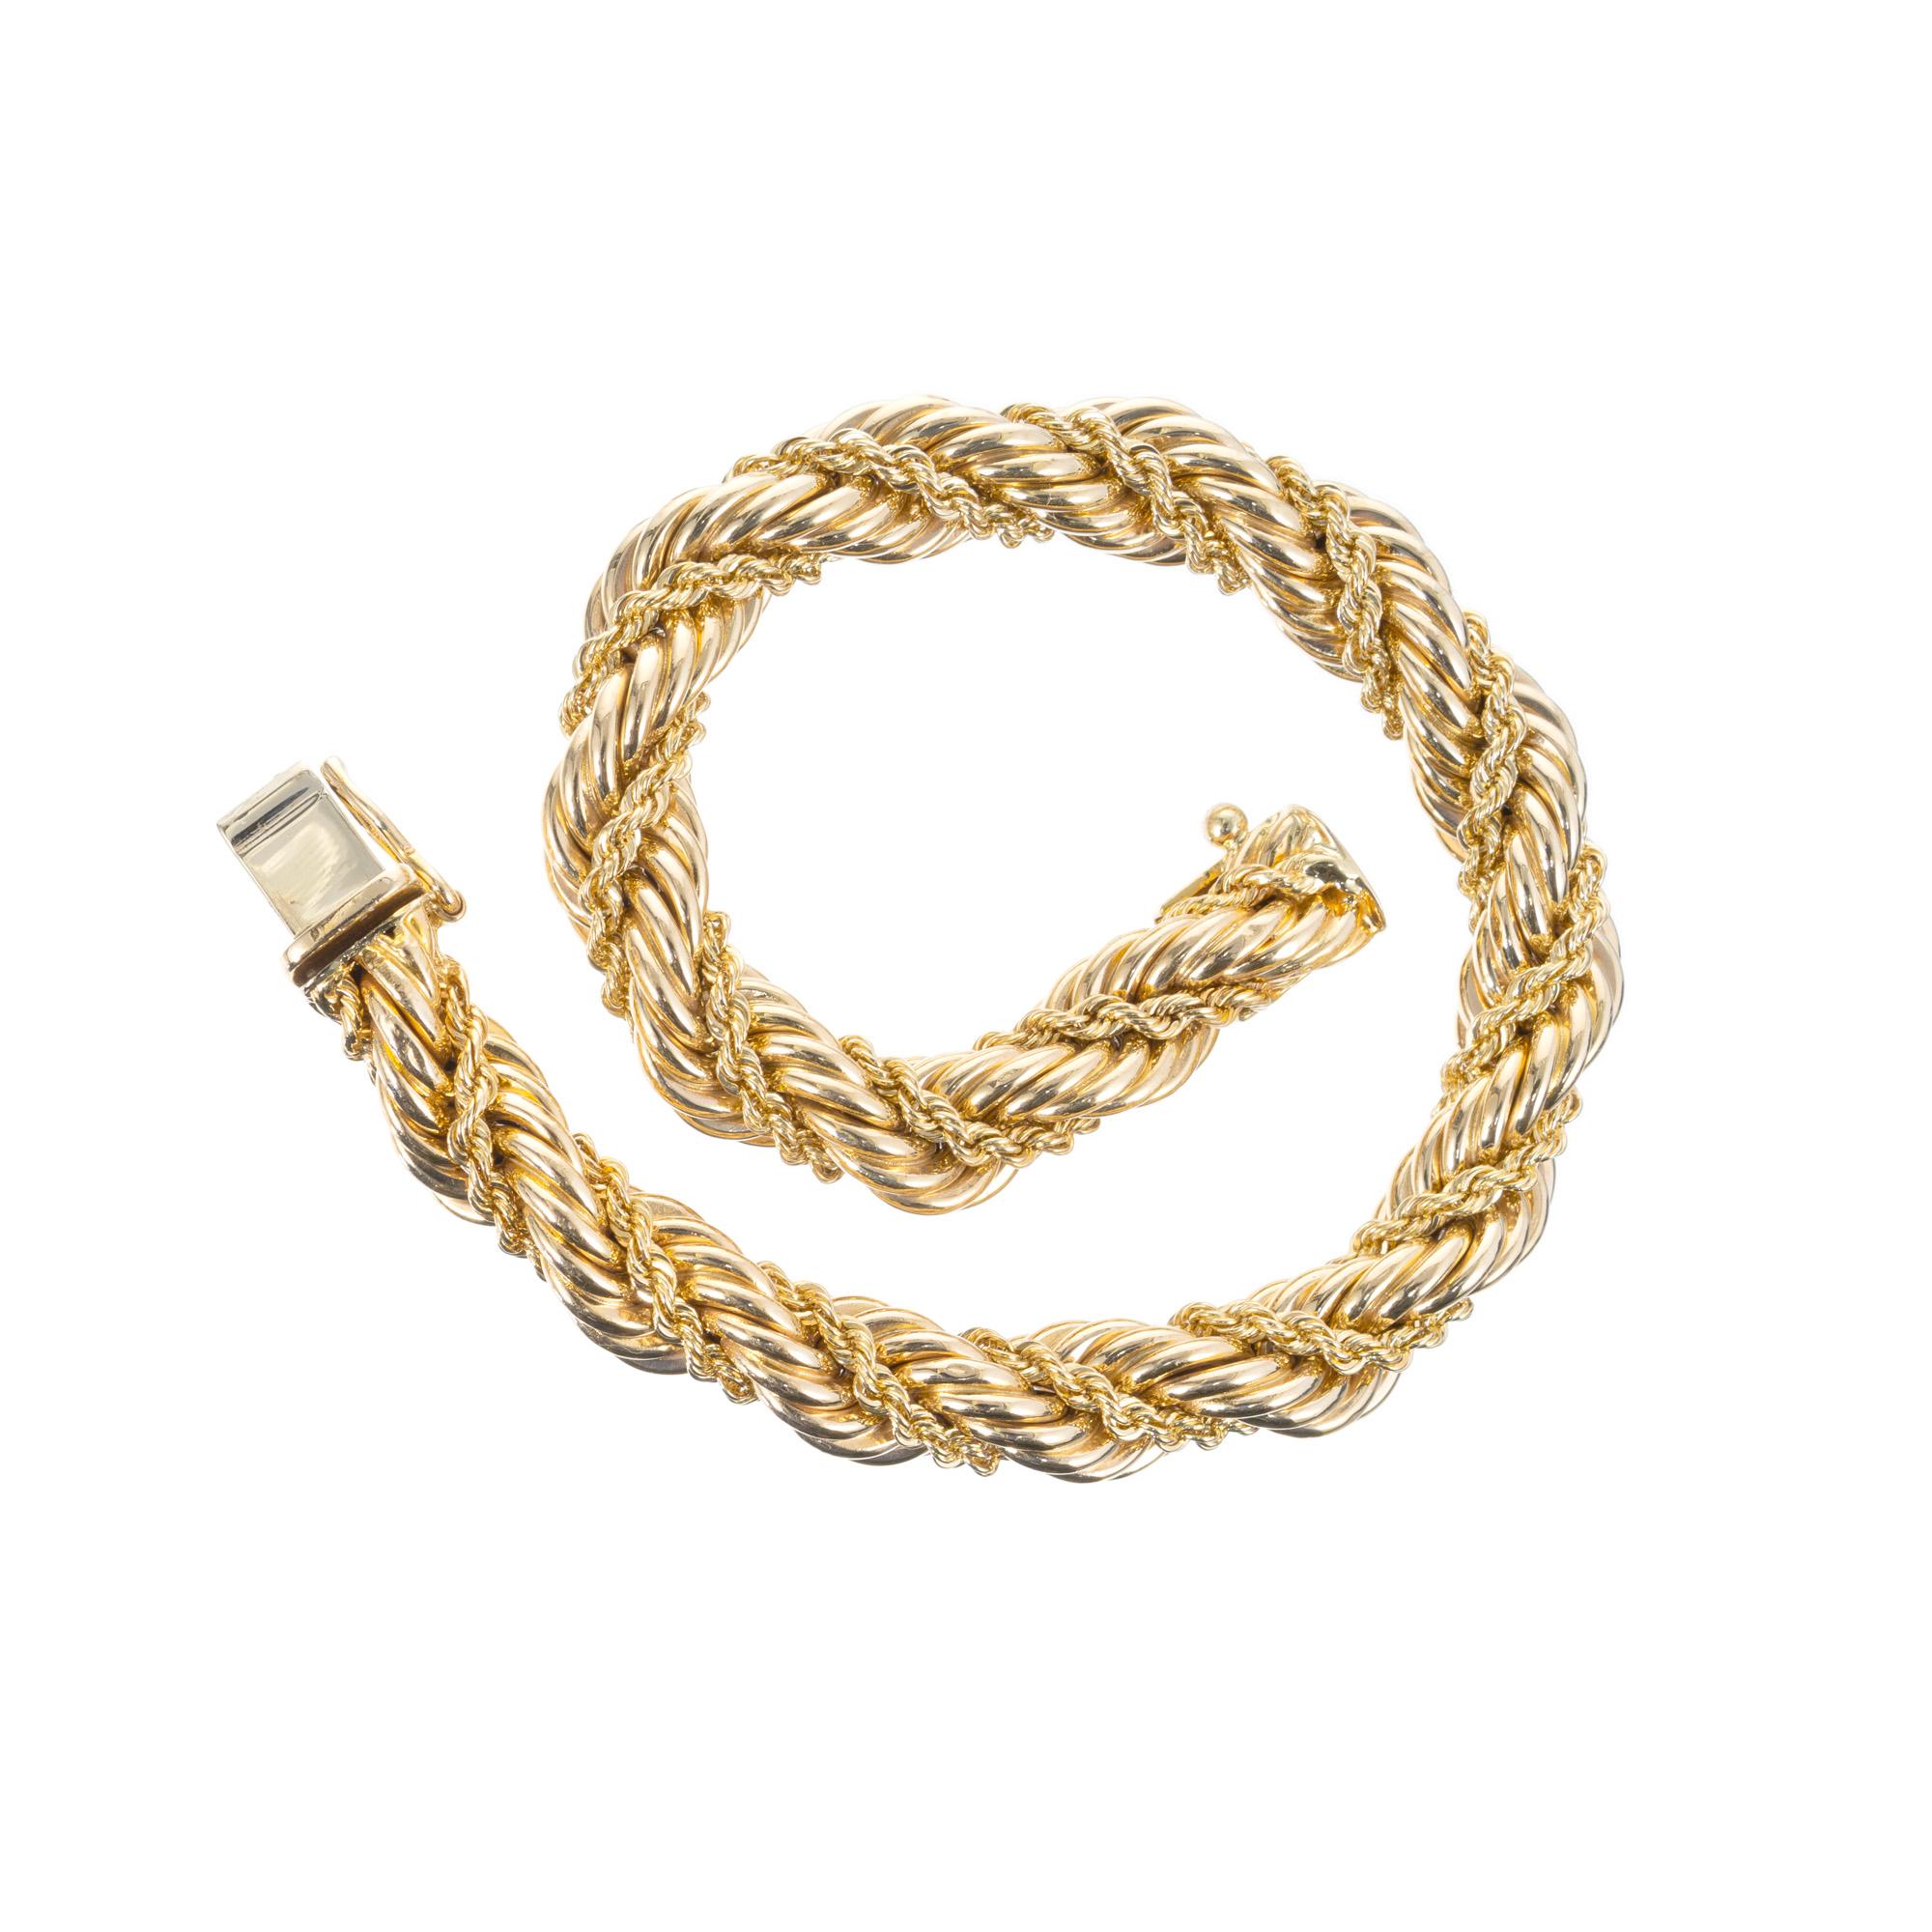 1960's original Tiffany & Co rope bracelet. 14k yellow gold twisted wire bracelet. There is also a second rope strand braided in the center. 7.5 inches. This classic Tiffany mid-century bracelet is stamped with Tiffany + Co hallmark. 

14k yellow